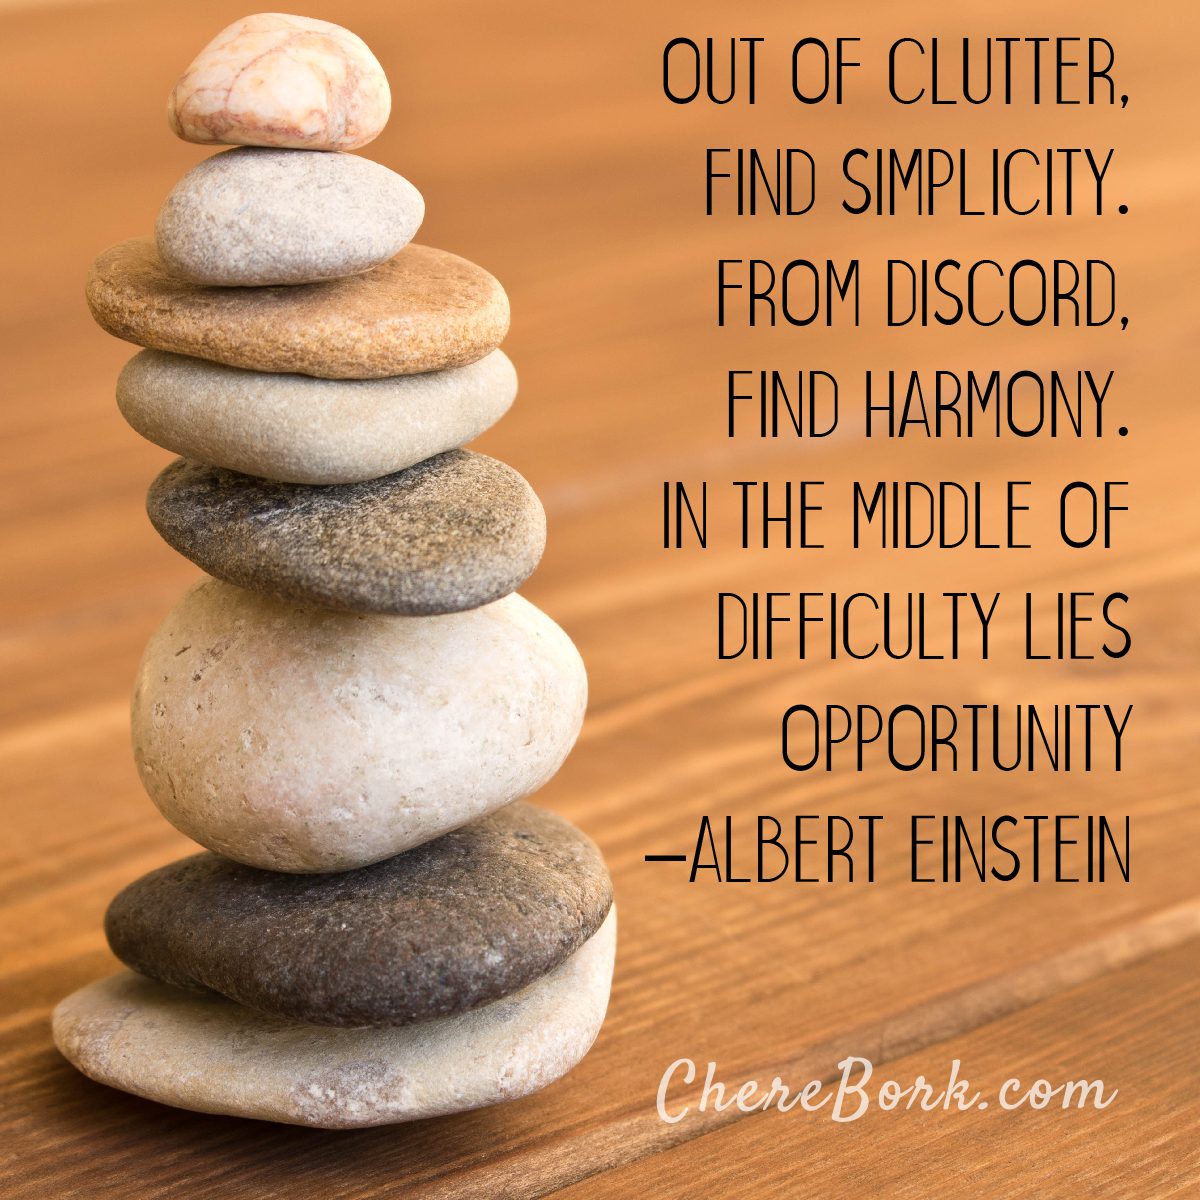 Out of clutter, find simplicity. From discord, find harmony. In the middle of difficulty lies opportunity. -Albert Einstein